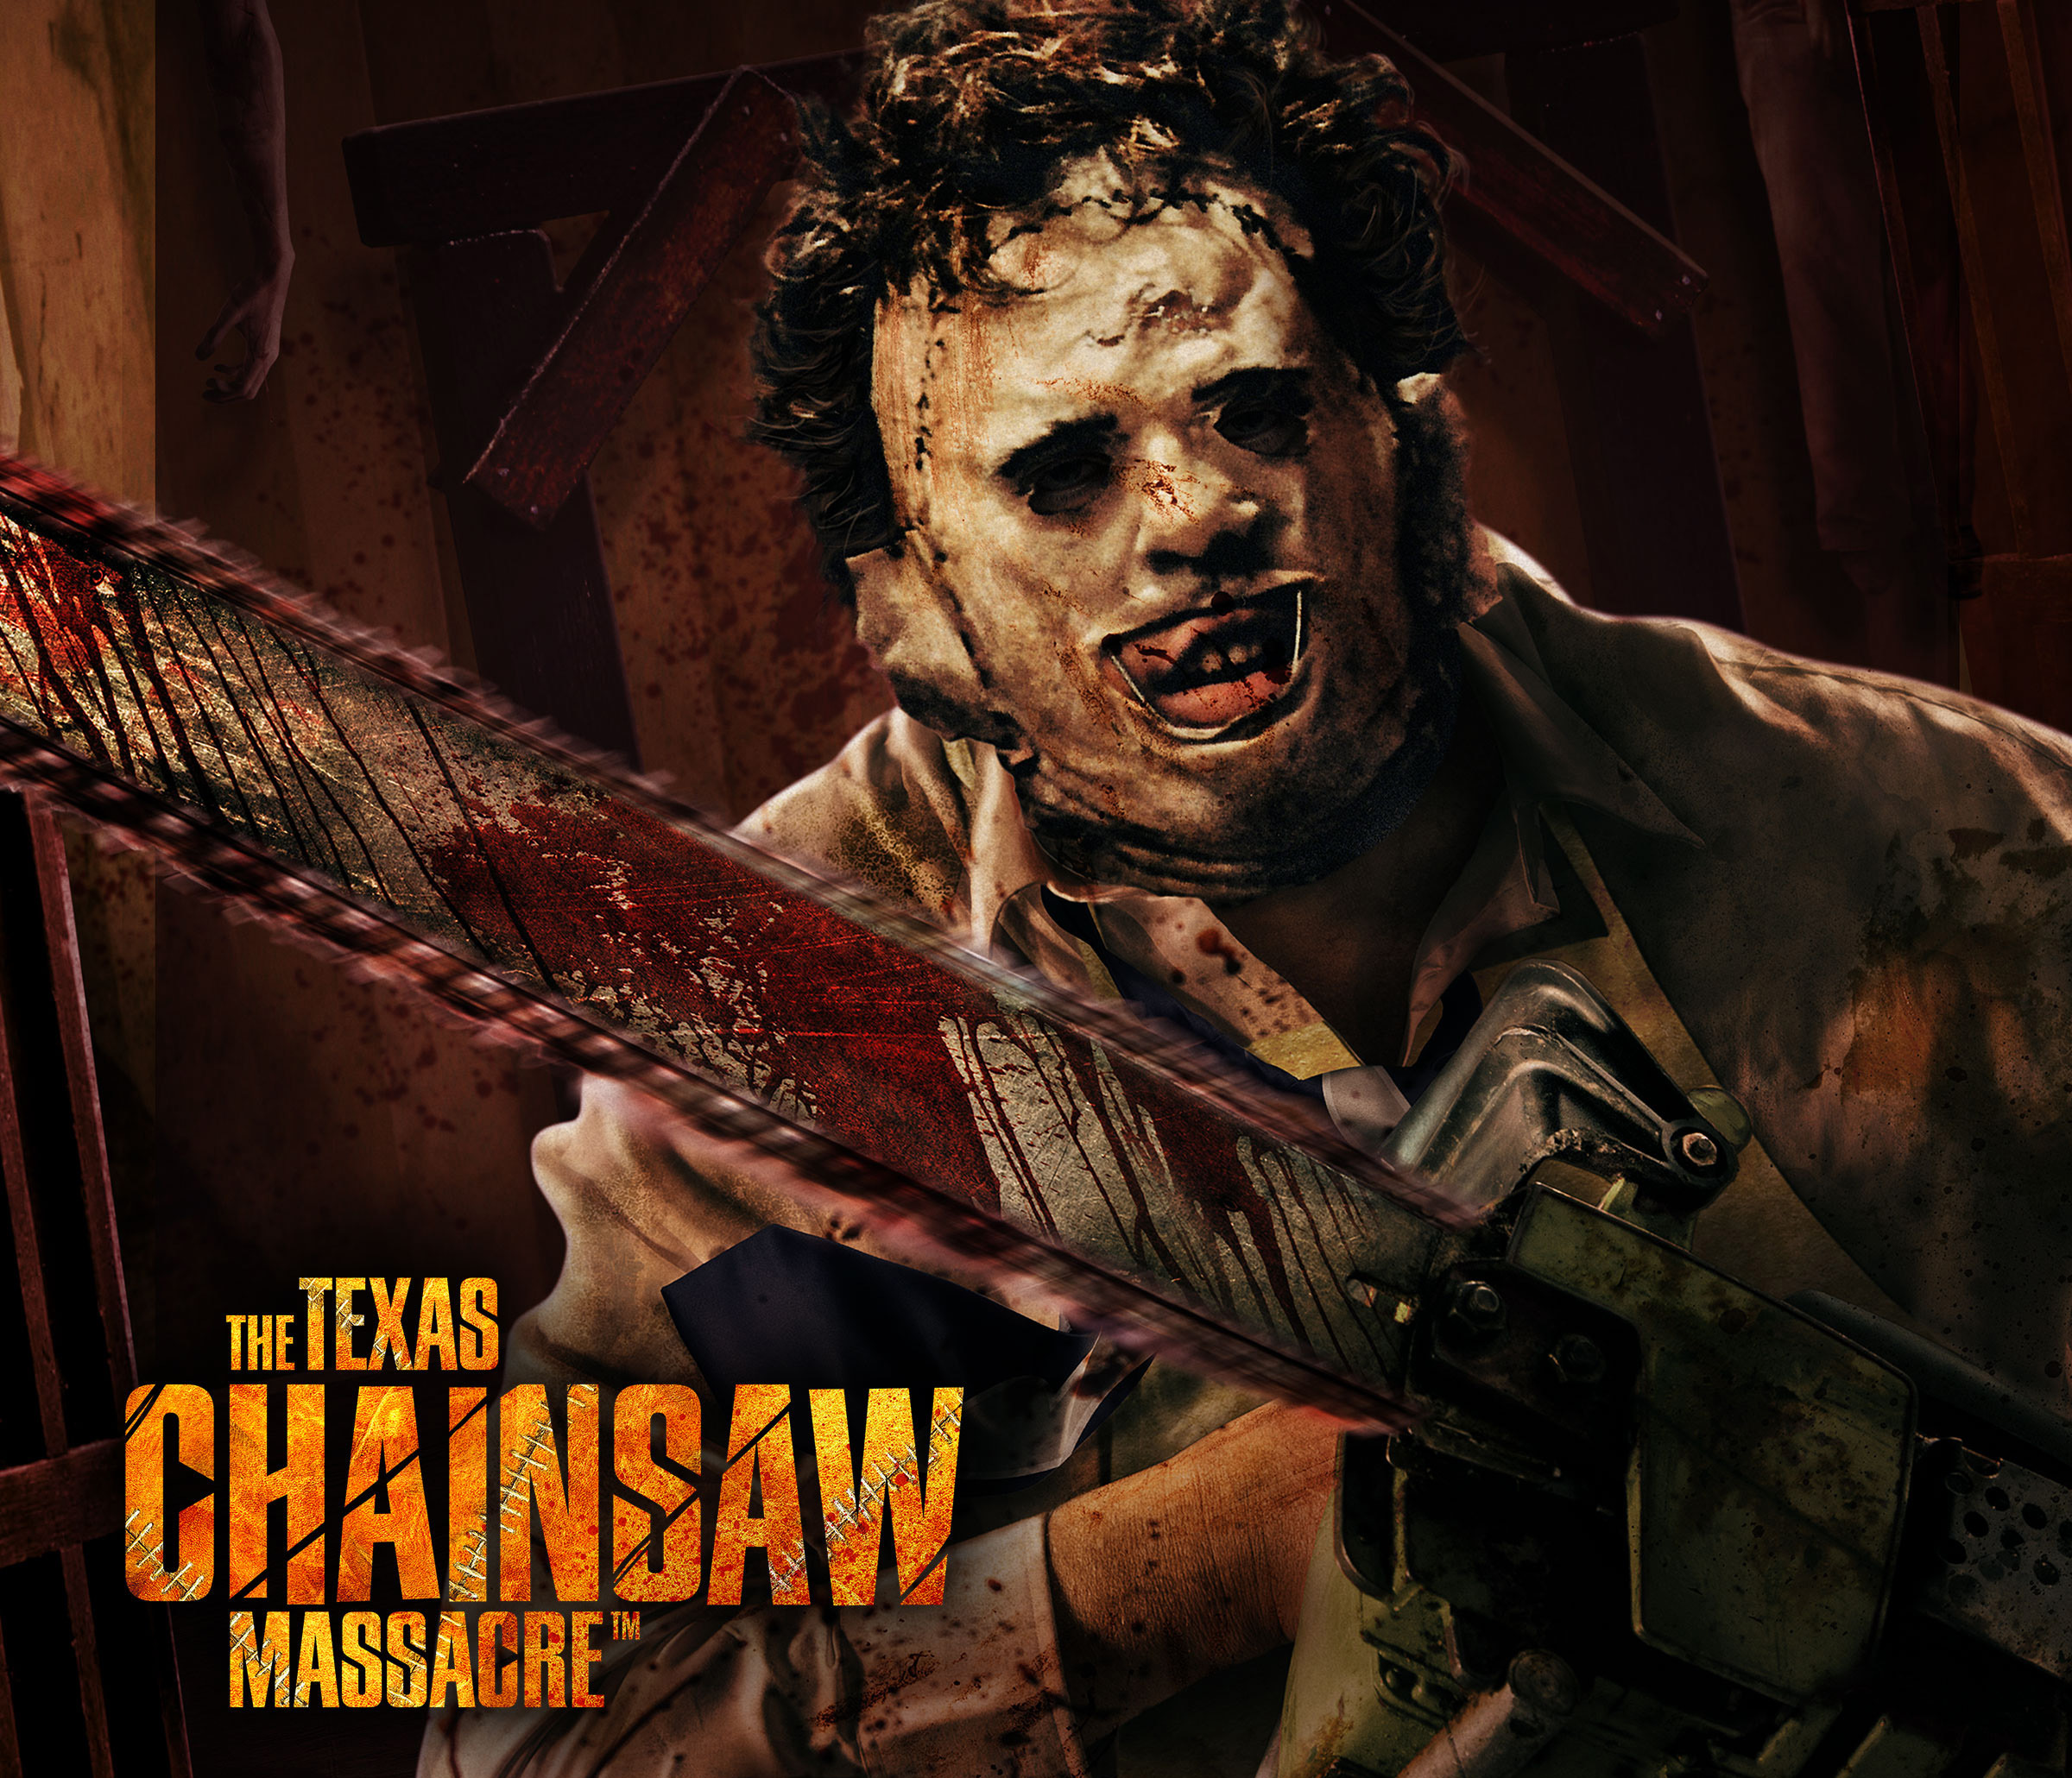 Texas Chainsaw Massacre coming to Halloween Horror Nights | Inside ...